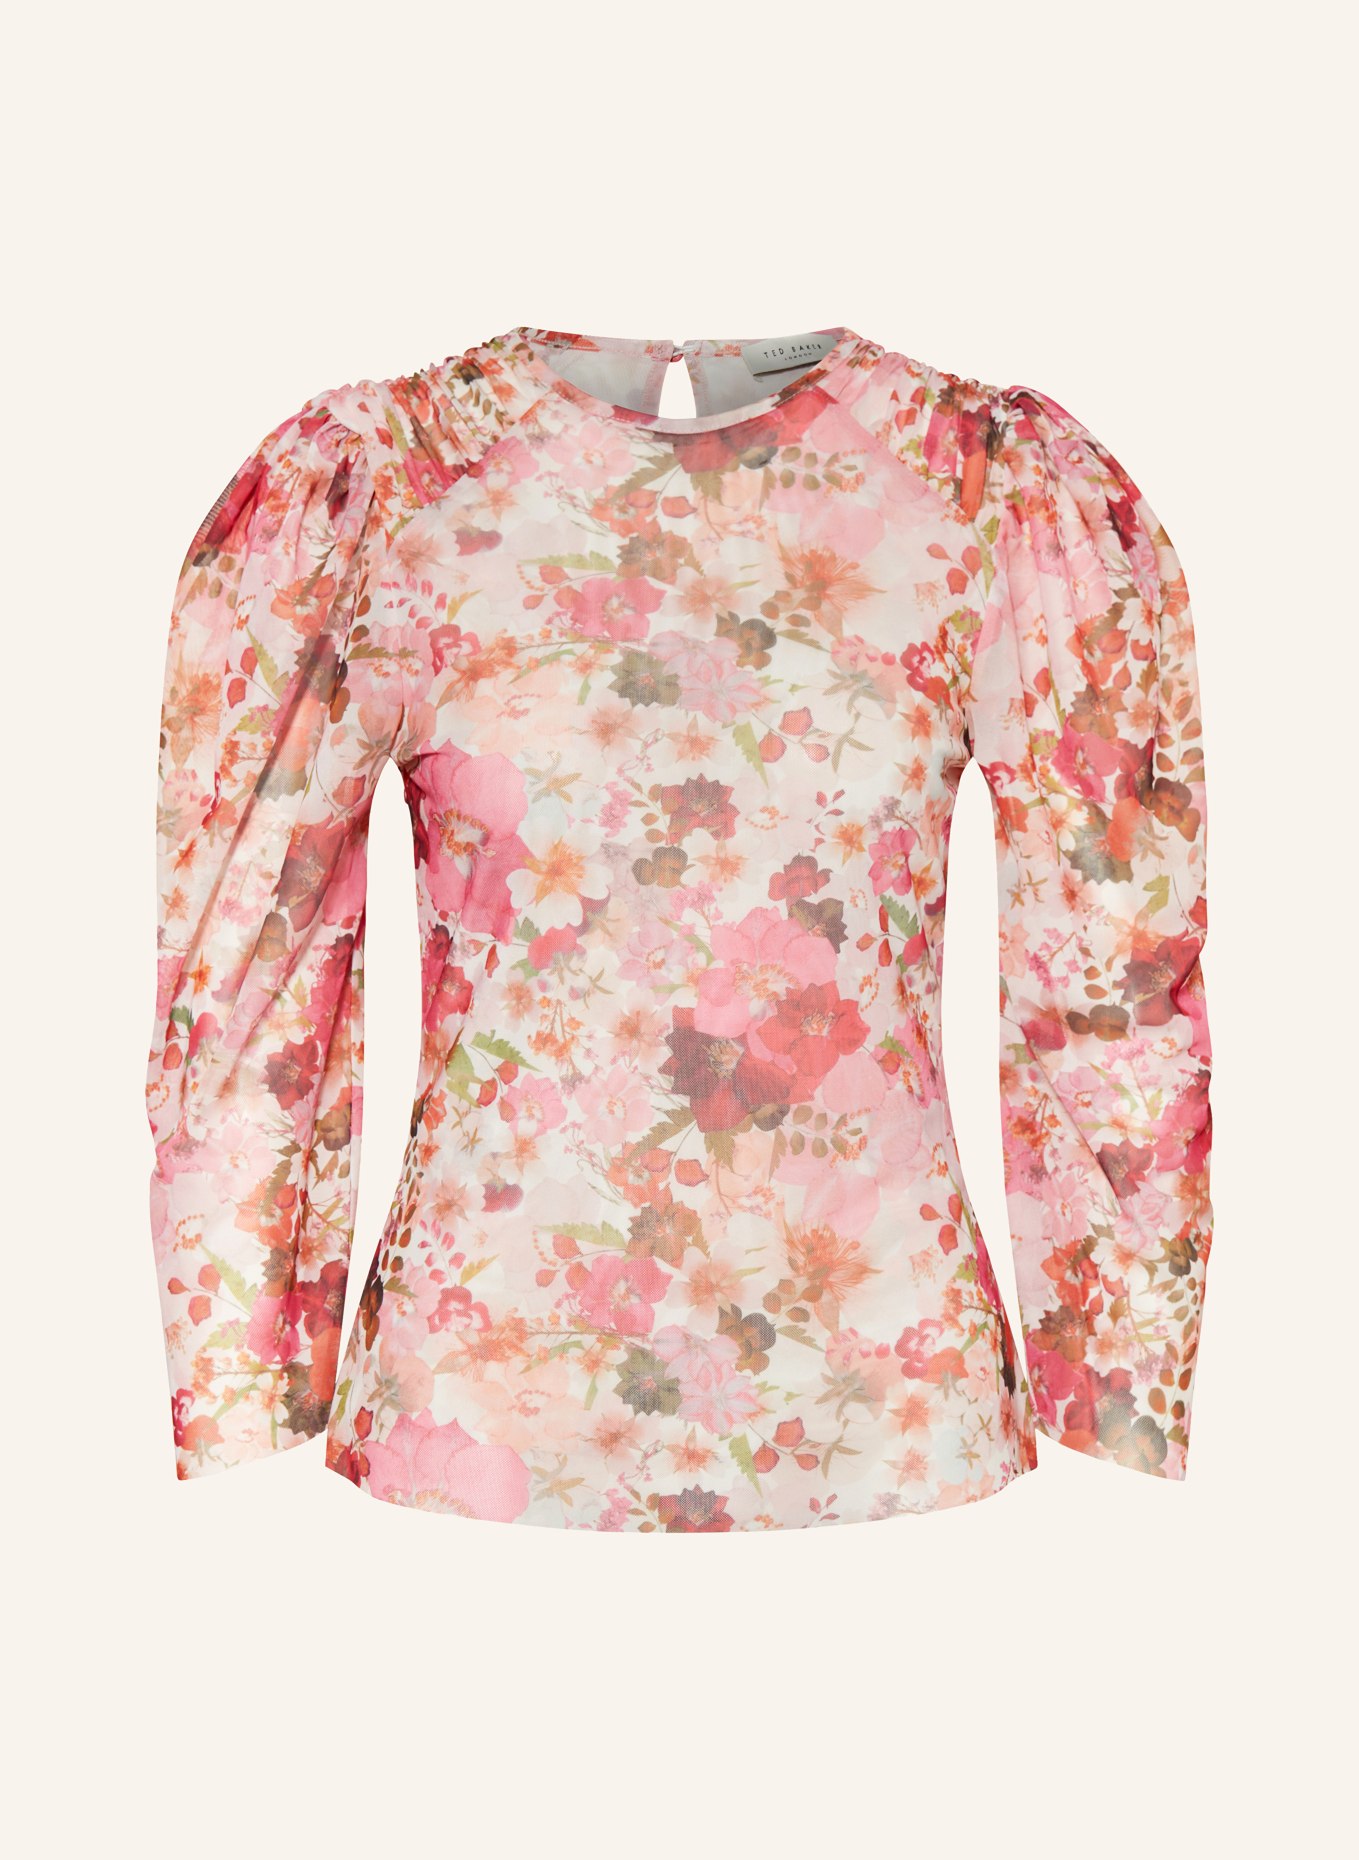 TED BAKER Shirt blouse RAELEY with 3/4 sleeves, Color: CREAM/ PINK/ LIGHT ORANGE (Image 1)